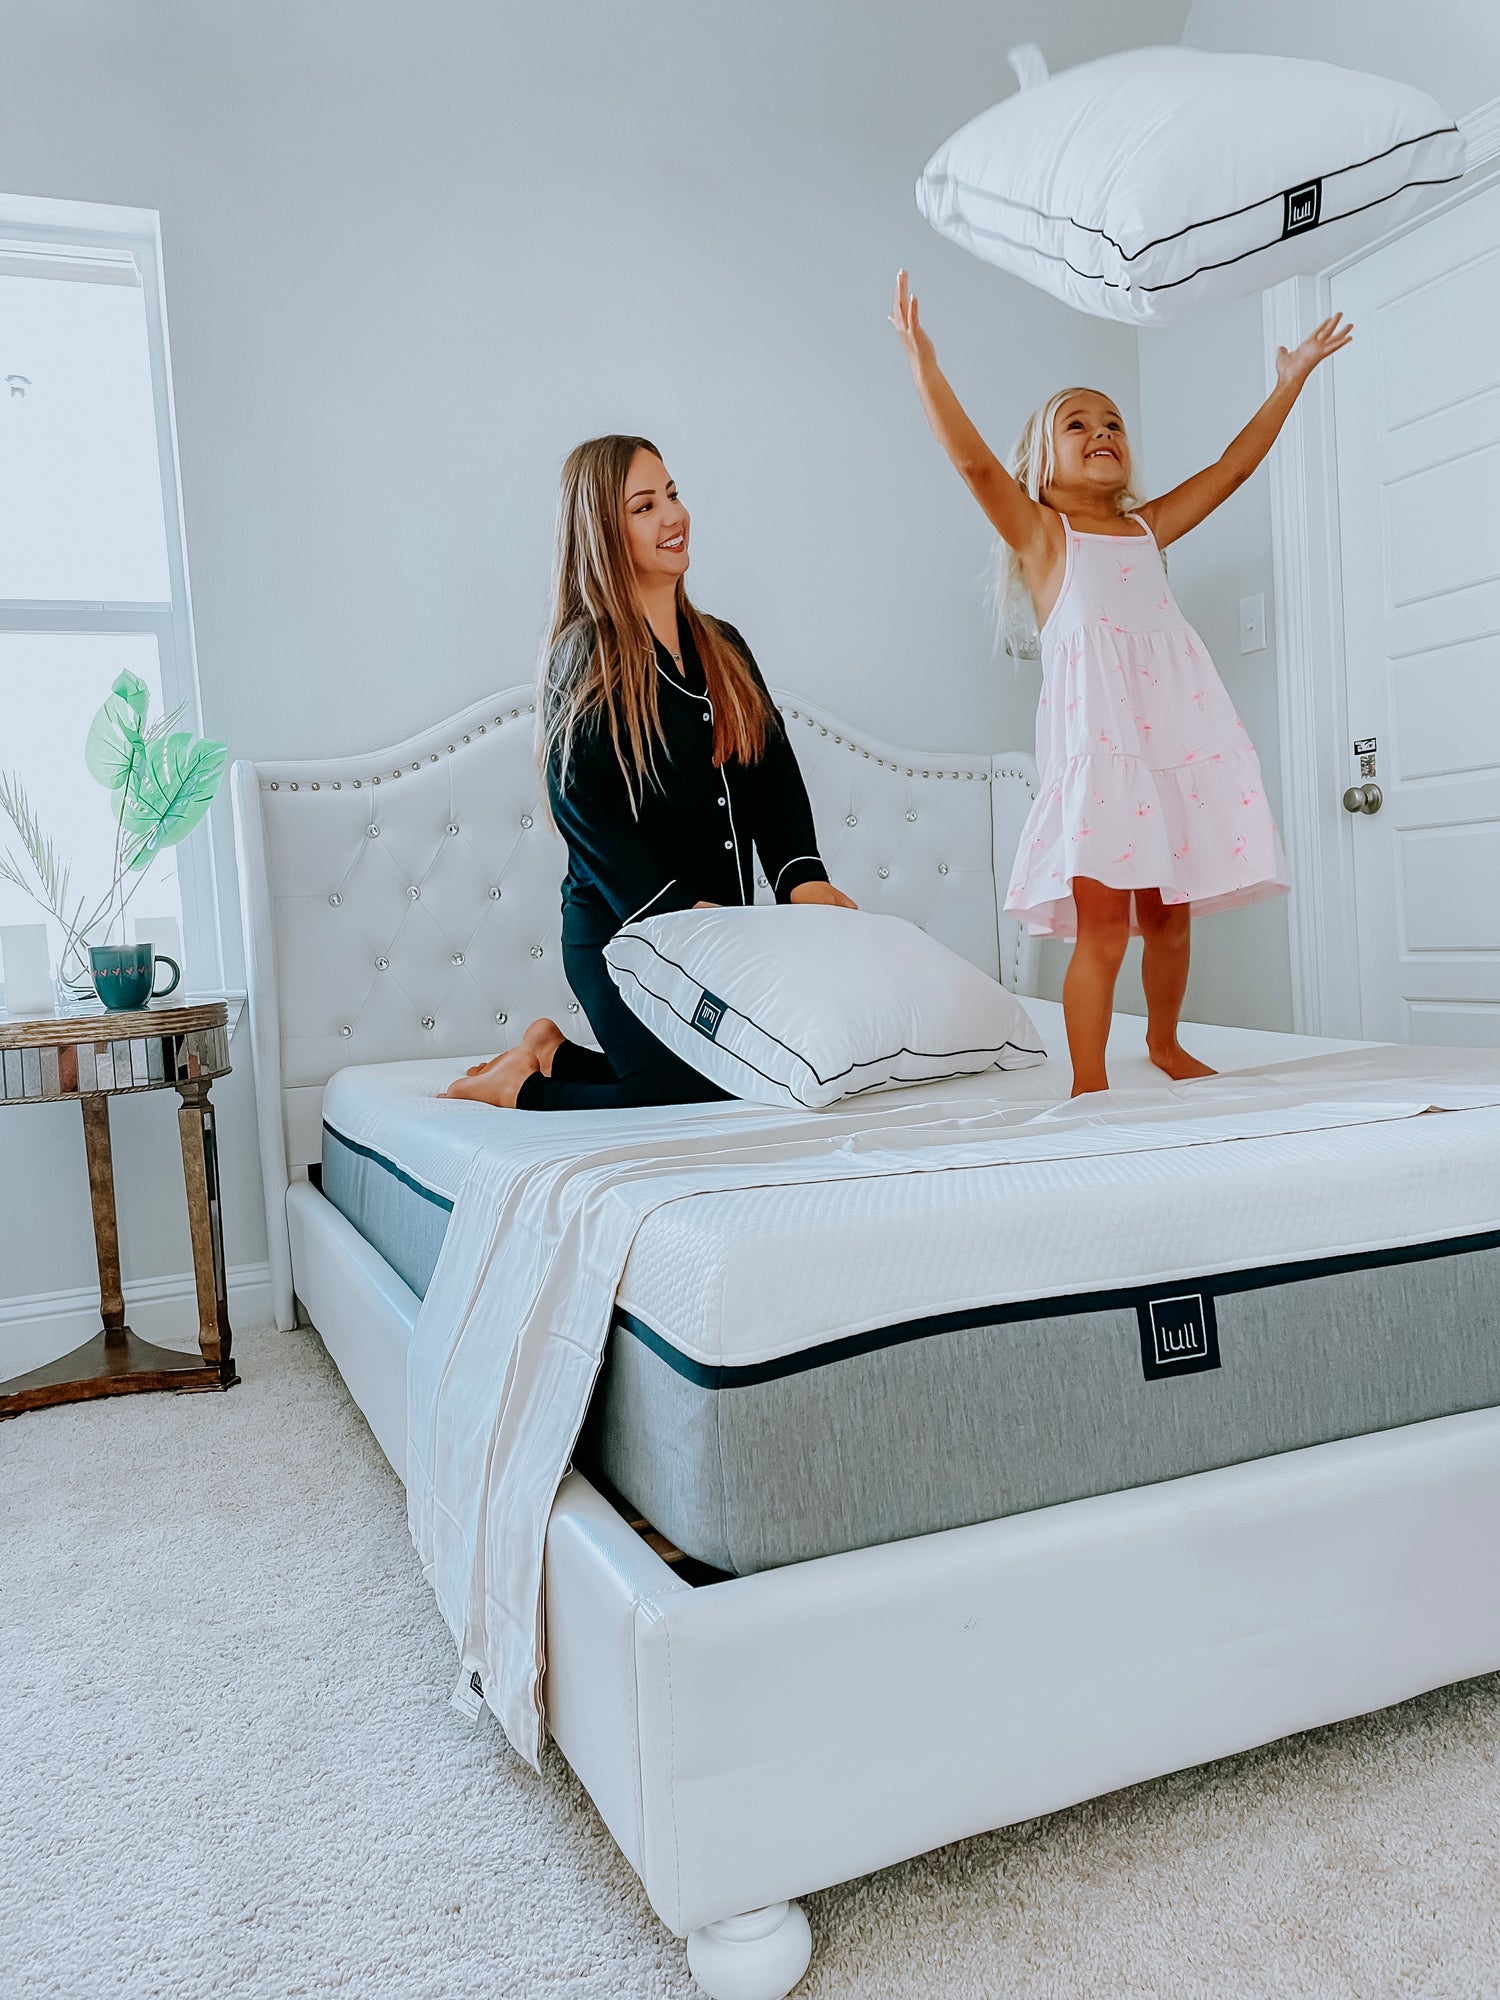 A mother and daughter on a lull mattress smiling and throwing a lull pillow in the air.